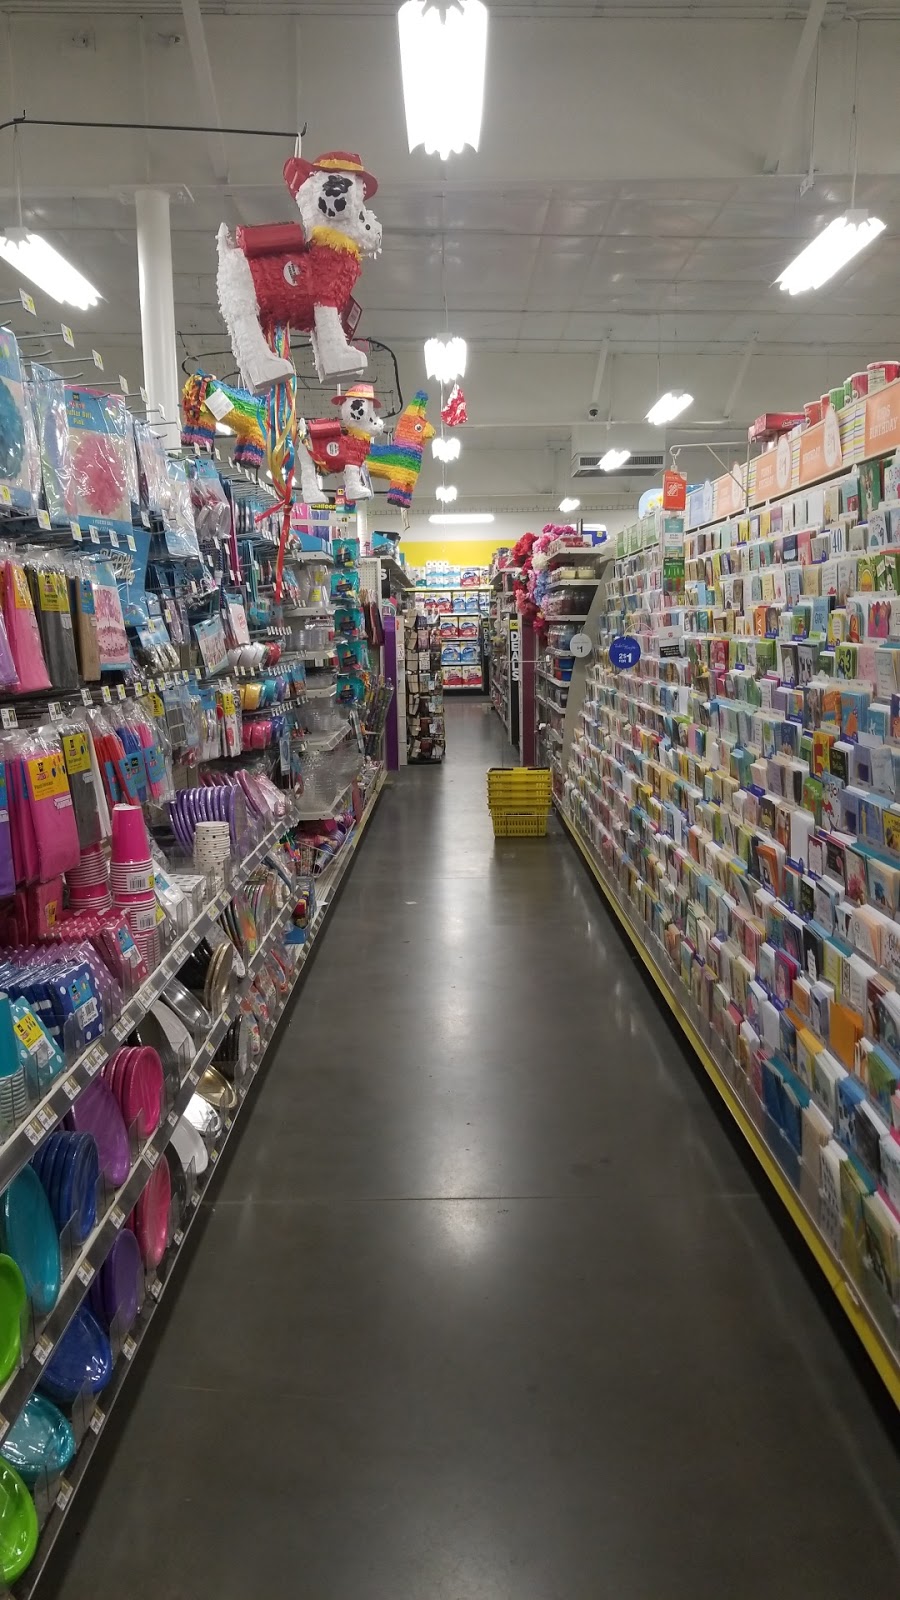 Dollar General | 13428 S Henderson Rd, Caruthers, CA 93609 | Phone: (559) 644-3345